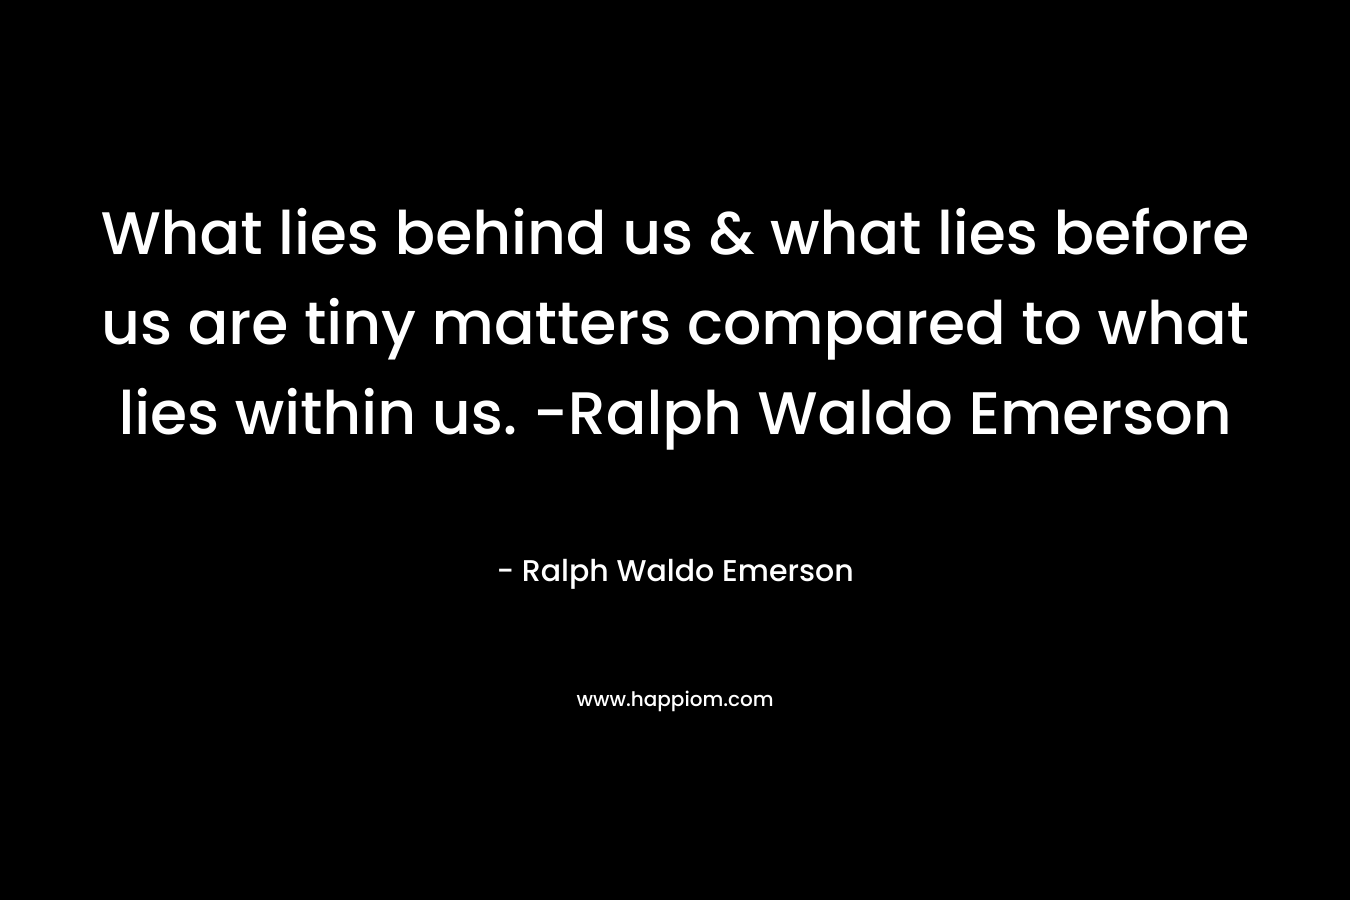 What lies behind us & what lies before us are tiny matters compared to what lies within us. -Ralph Waldo Emerson